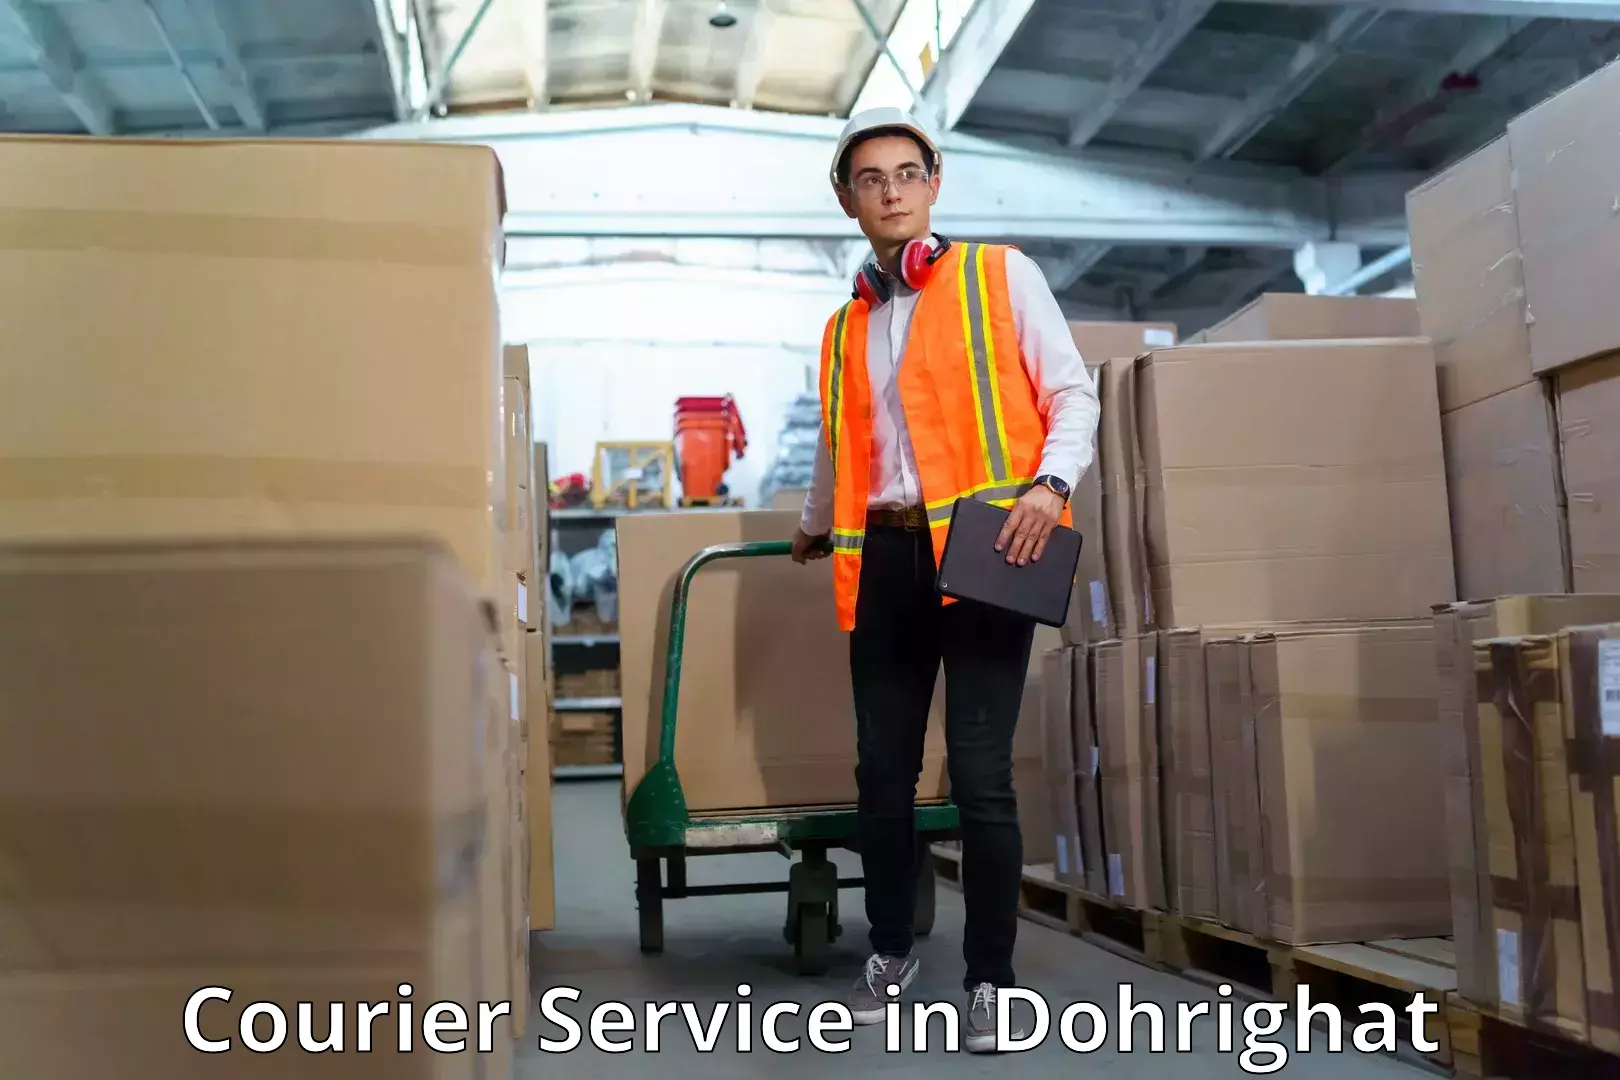 Pharmaceutical courier in Dohrighat